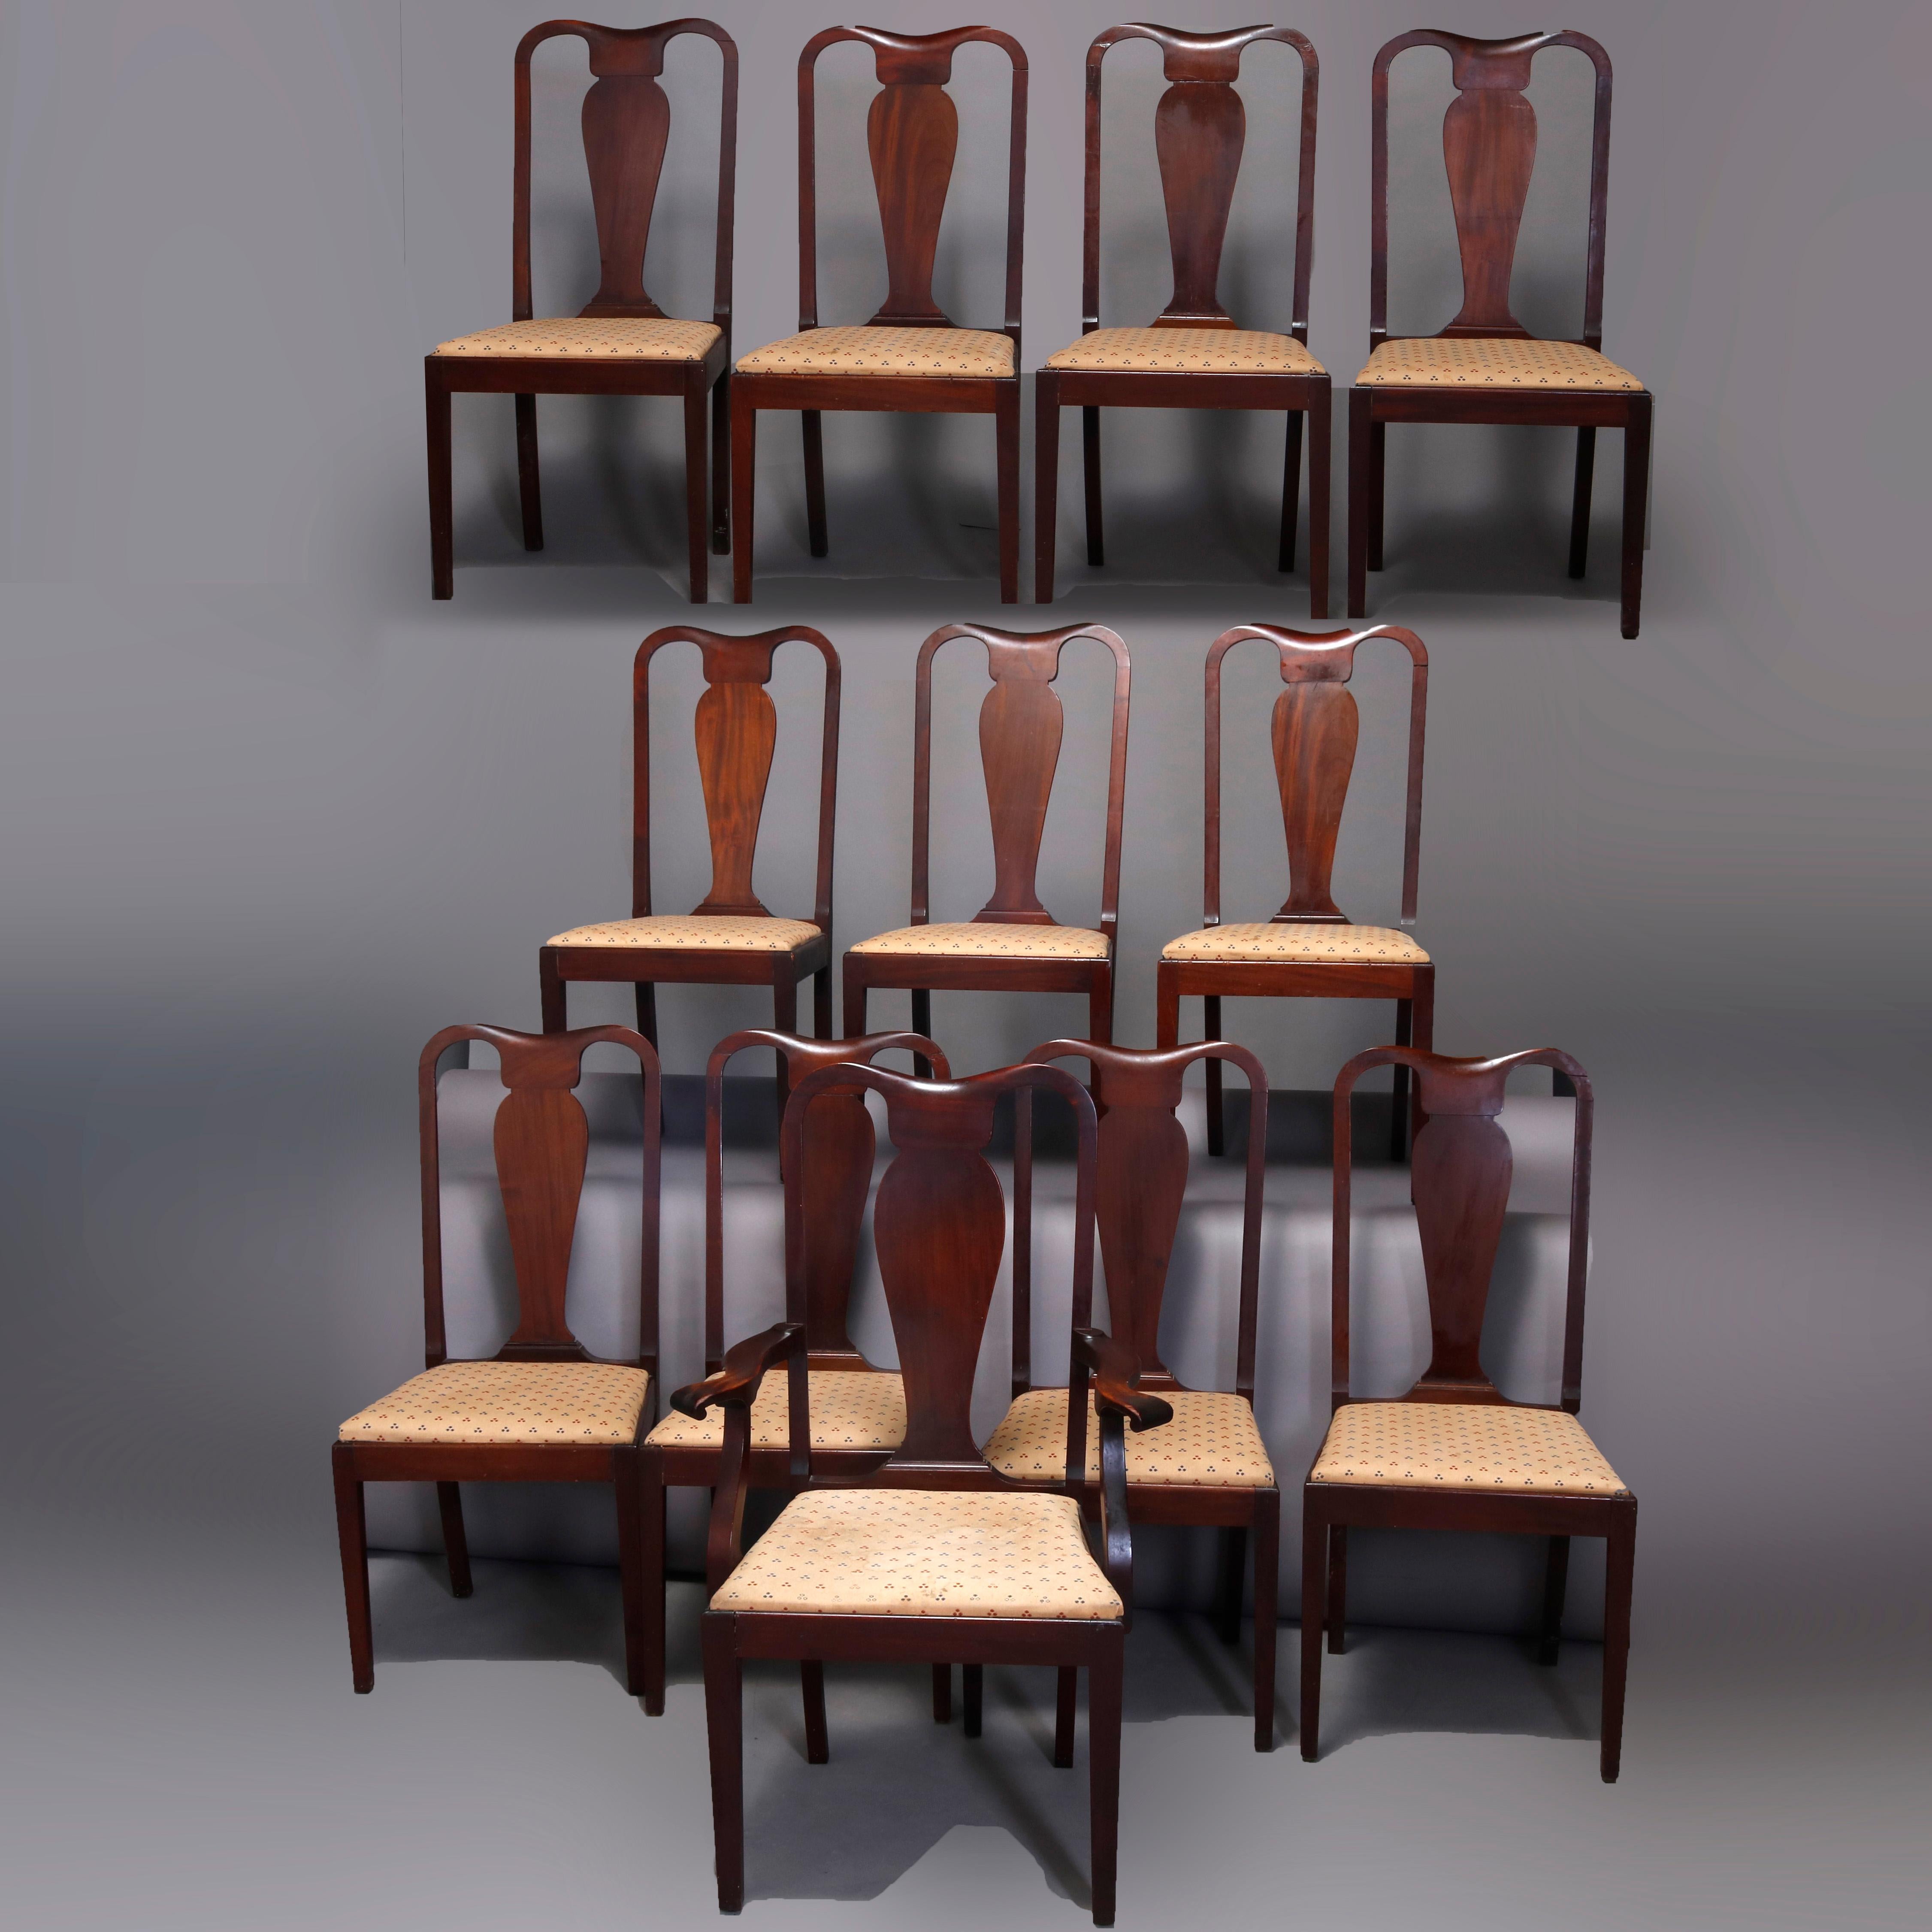 Set of 12 Vintage Hepplewhite Style Slat Back Mahogany Dining Chairs, circa 1930 In Good Condition For Sale In Big Flats, NY